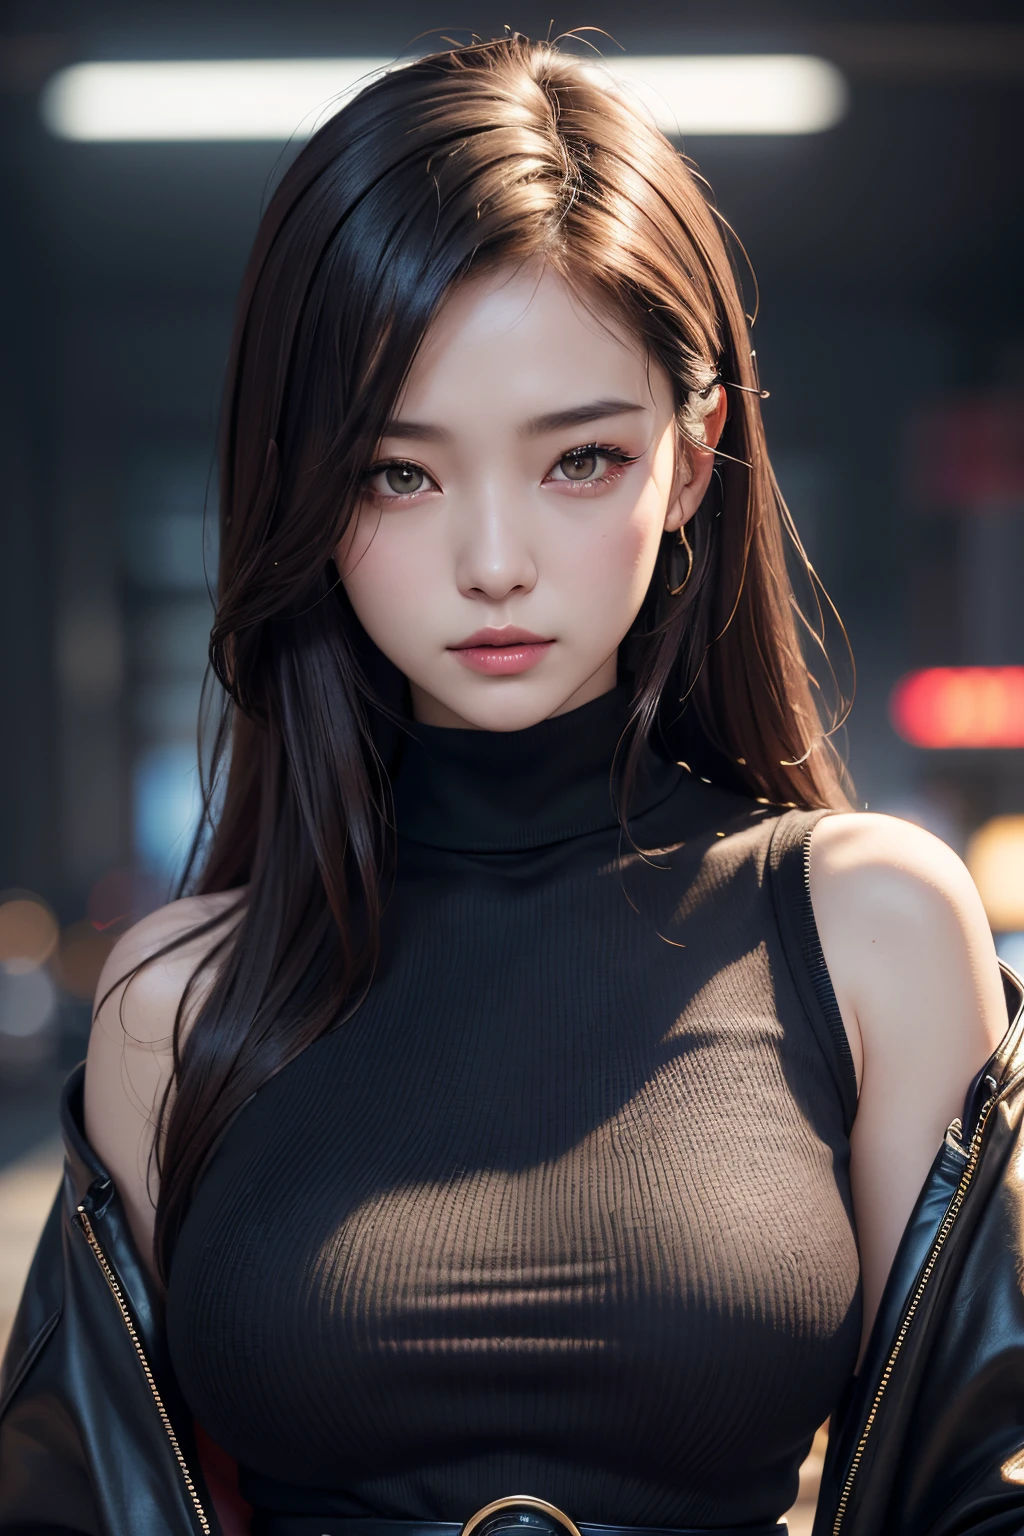 ​masterpiece, 1 beautiful girls, detaileds, Swollen eyes, top-quality, 超A high resolution, (Reality: 1.4), OriginalPhotographs, 1girl in, light, (A smile,:0.5) japanes, Asian Beauty, Korean, Proper, very extremely beautiful, Slightly younger face, Beautiful skins, slender, cyberpunk backgrouns, (A hyper-realistic), (illustratio), (hight resolution), (8K), (ighly detailed), (Best illustration beautifully detailed eyes), (Ultra-detail), (wall-), (Detailed face), looking at the viewers, fine detailed, A detailed face、deep-shadows、Unobtrusive、pureerosfaceace_v1、Hit the 46-point diagonal straight ahead.、(Dark red turtleneck low gauge knit blouse), Golden Buckle Belt, Black leather pants, ((dark brown duffel coat)),、Black colored eyes、